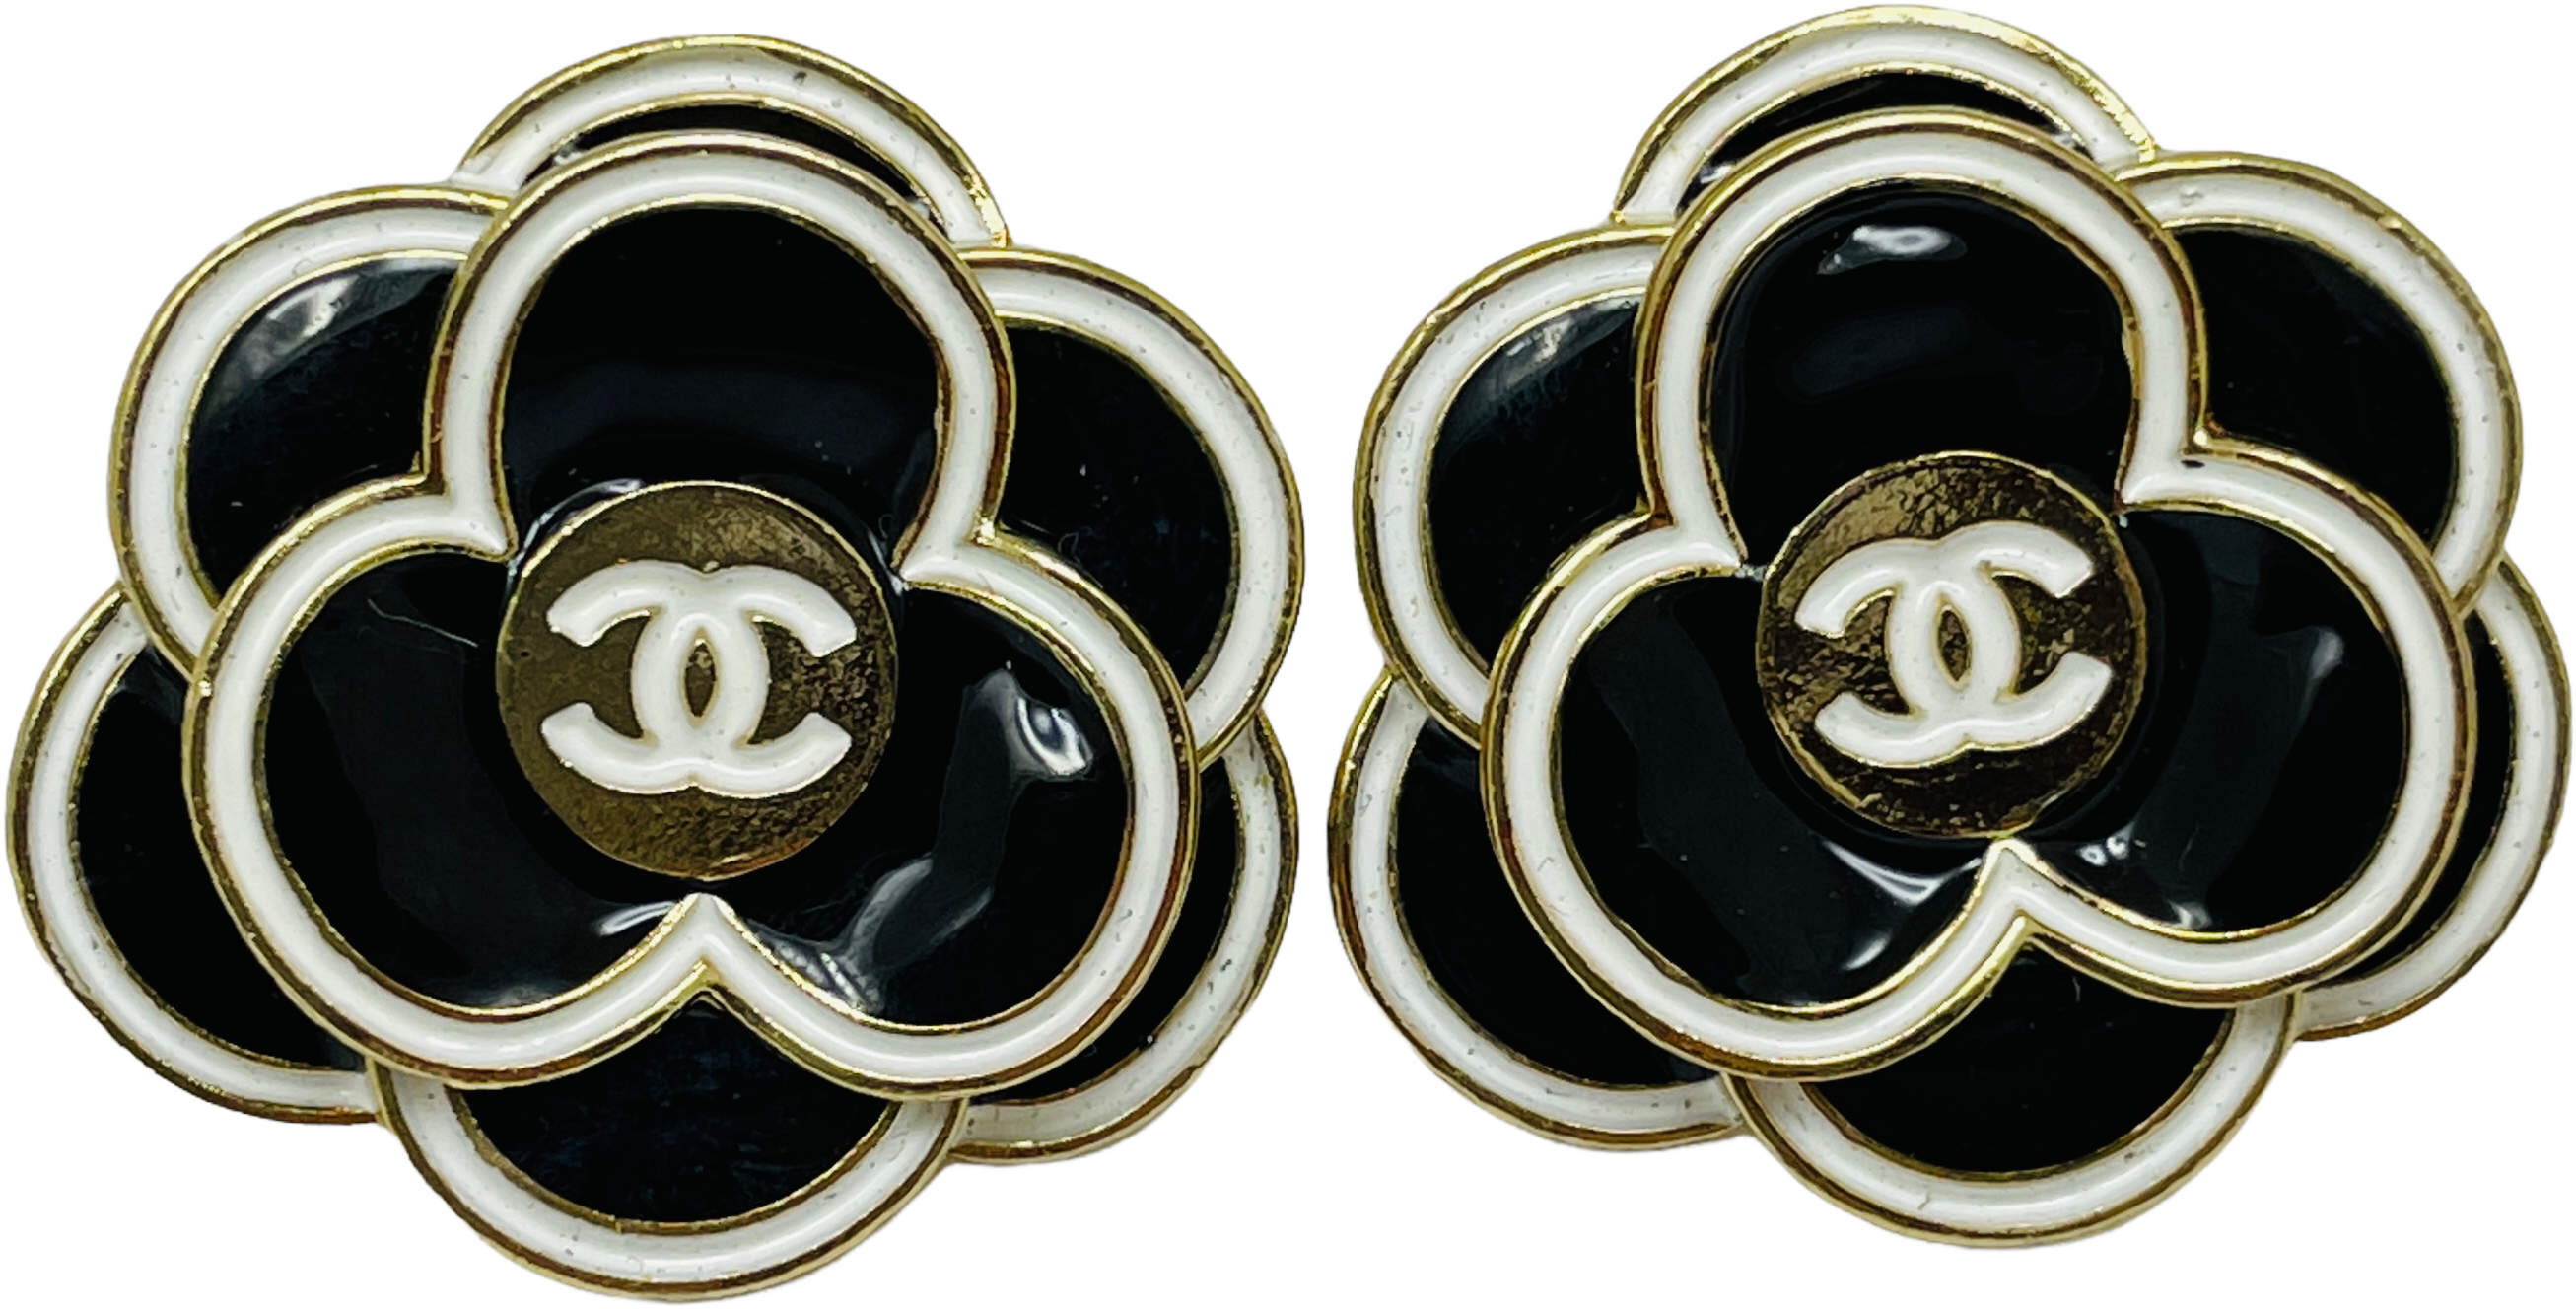 Chanel Cc Camellia Black Recycled Buttons Earrings